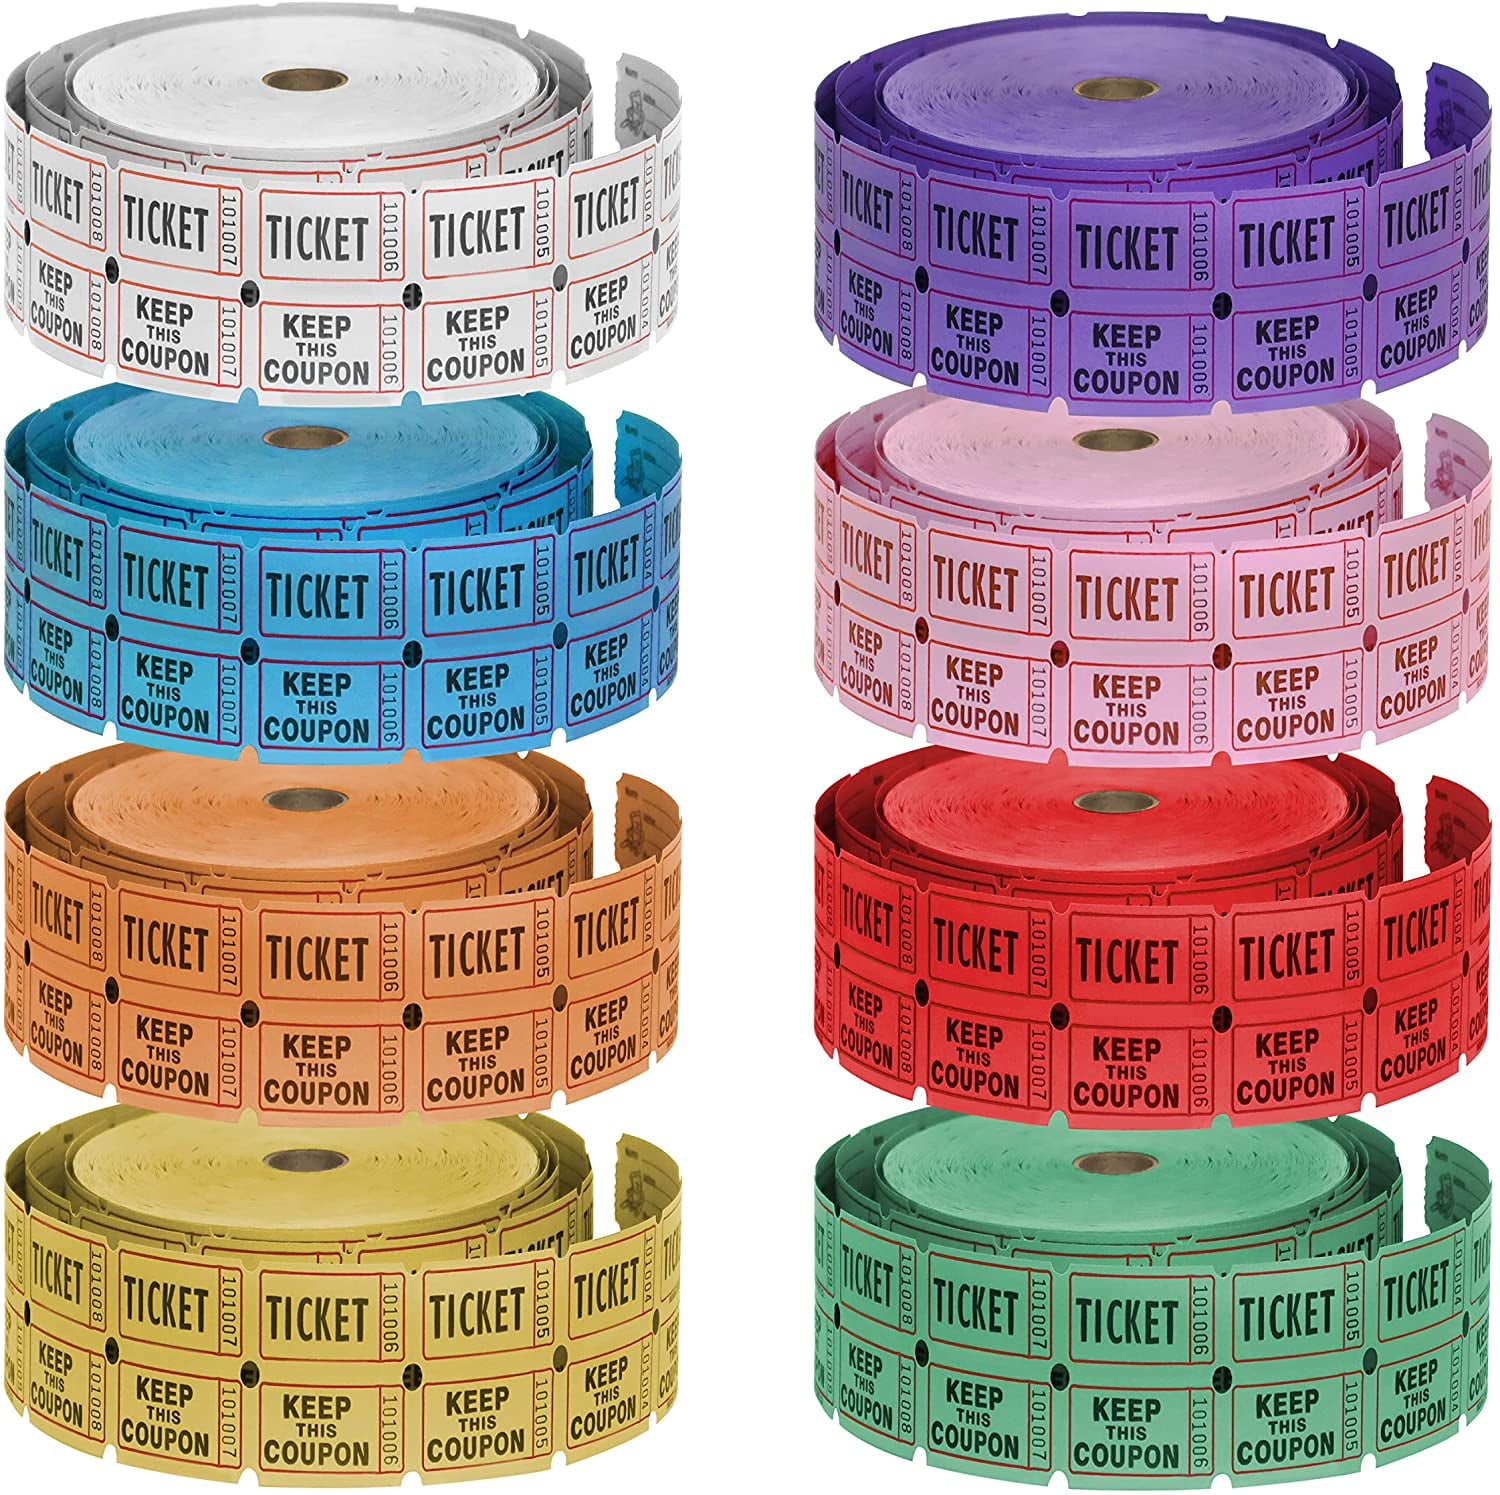 Double Roll Raffle Event Tickets 8 Rolls of 2000 Tickets Each Full Set of 8 Colors 